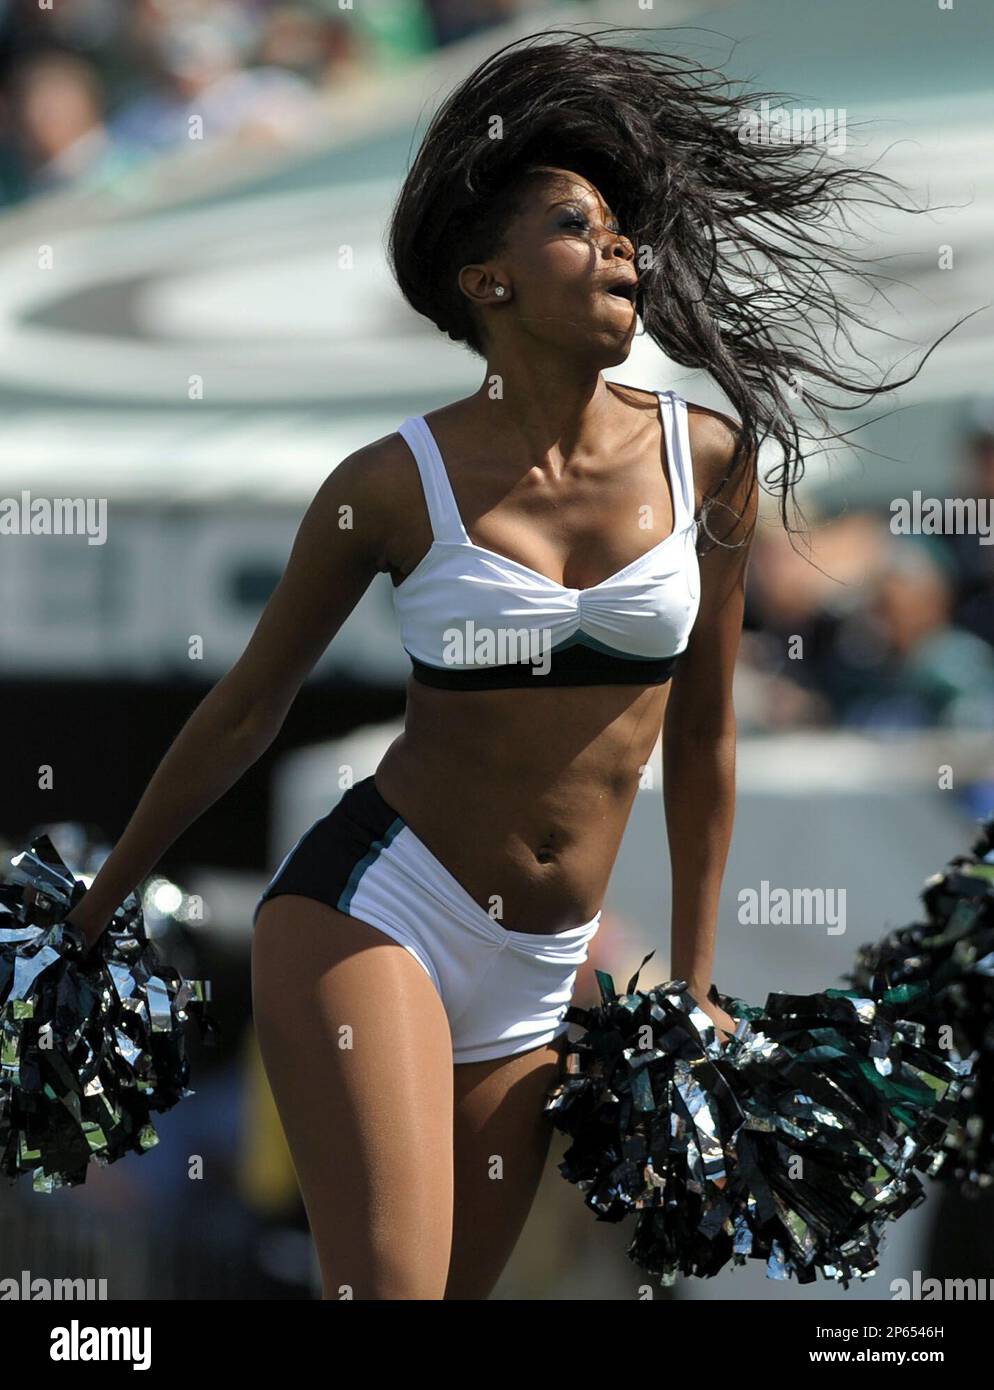 An Eagles cheerleader performs on the field, on September 16th